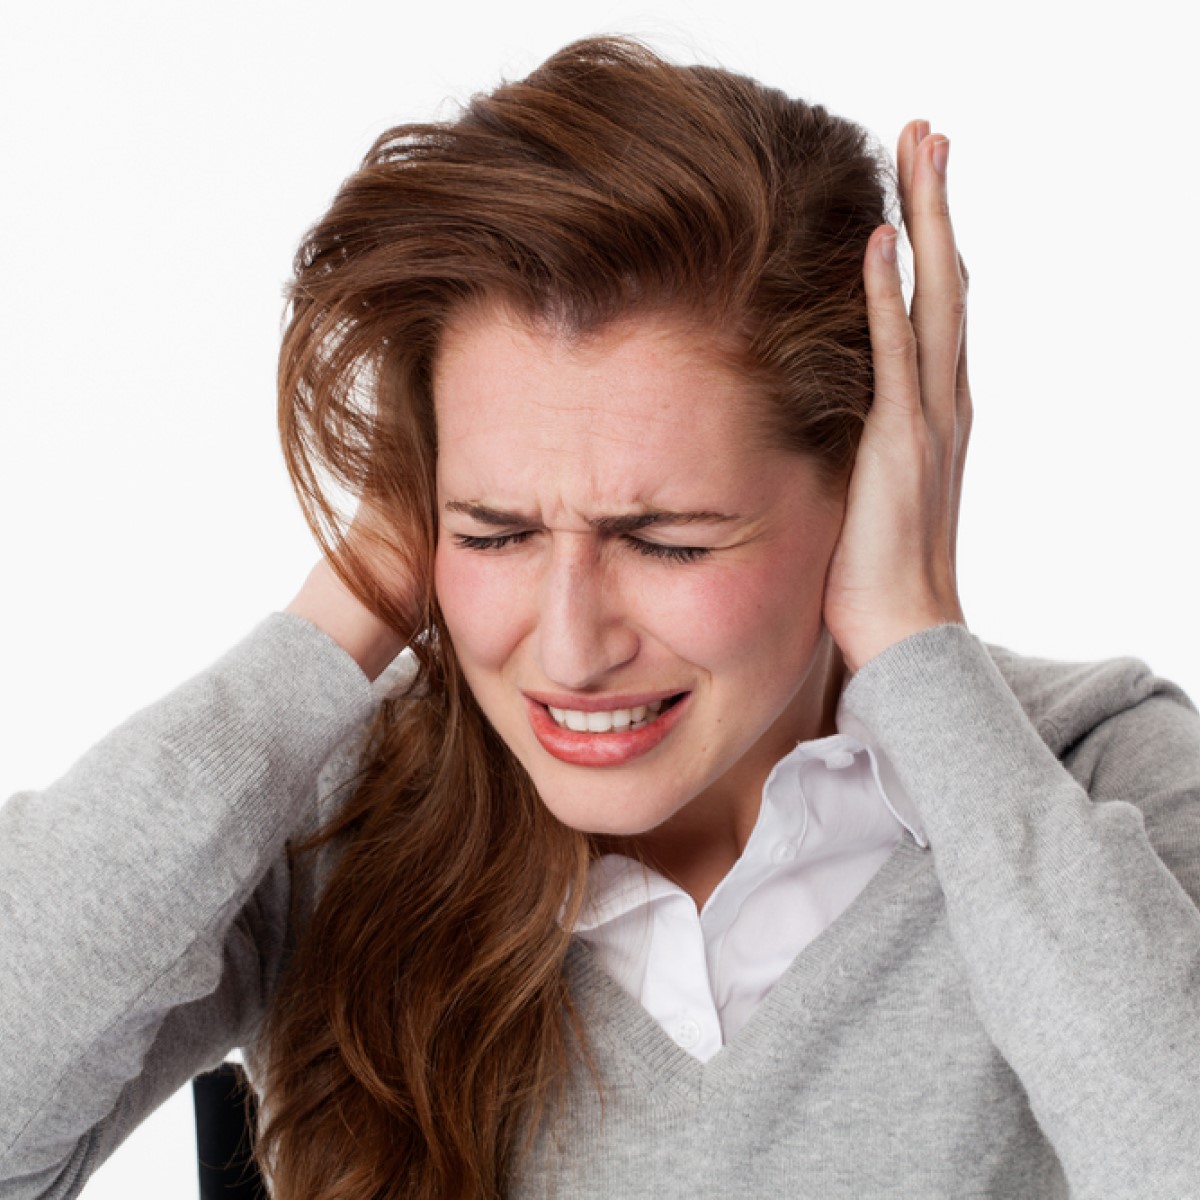 TINNITUS (RINGING IN THE EARS) – Symptoms, Causes, And Natural Remedies For Tinnitus Treatment